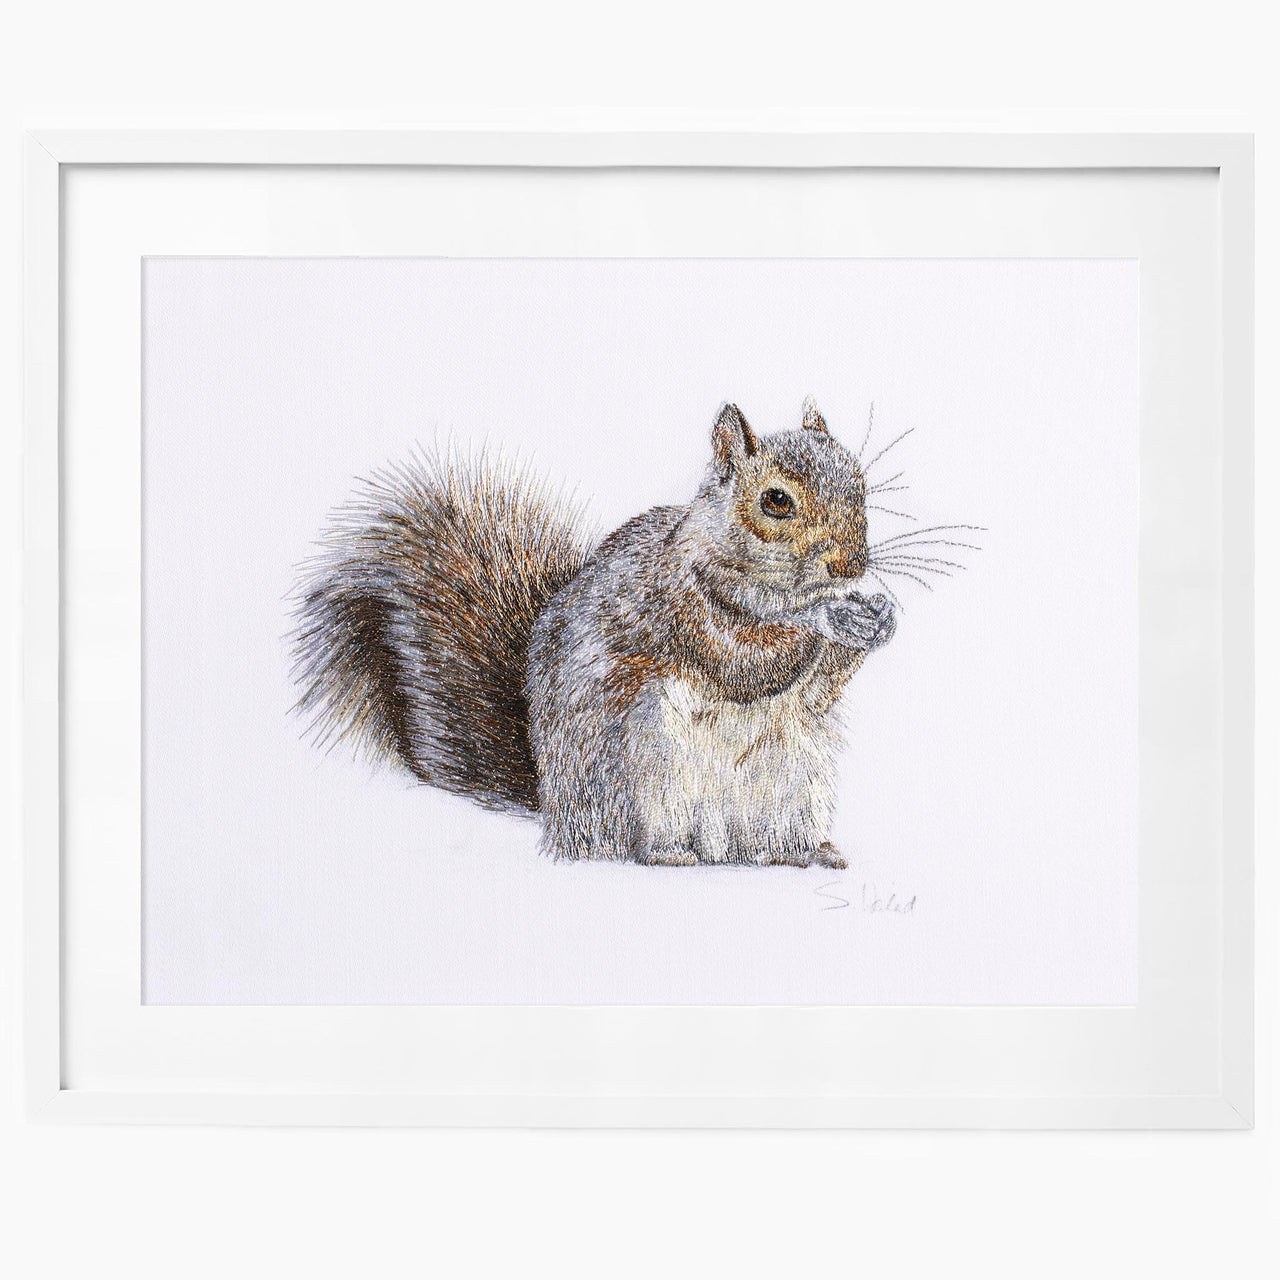 Squirrel hand embroidery limited edition print in white frame